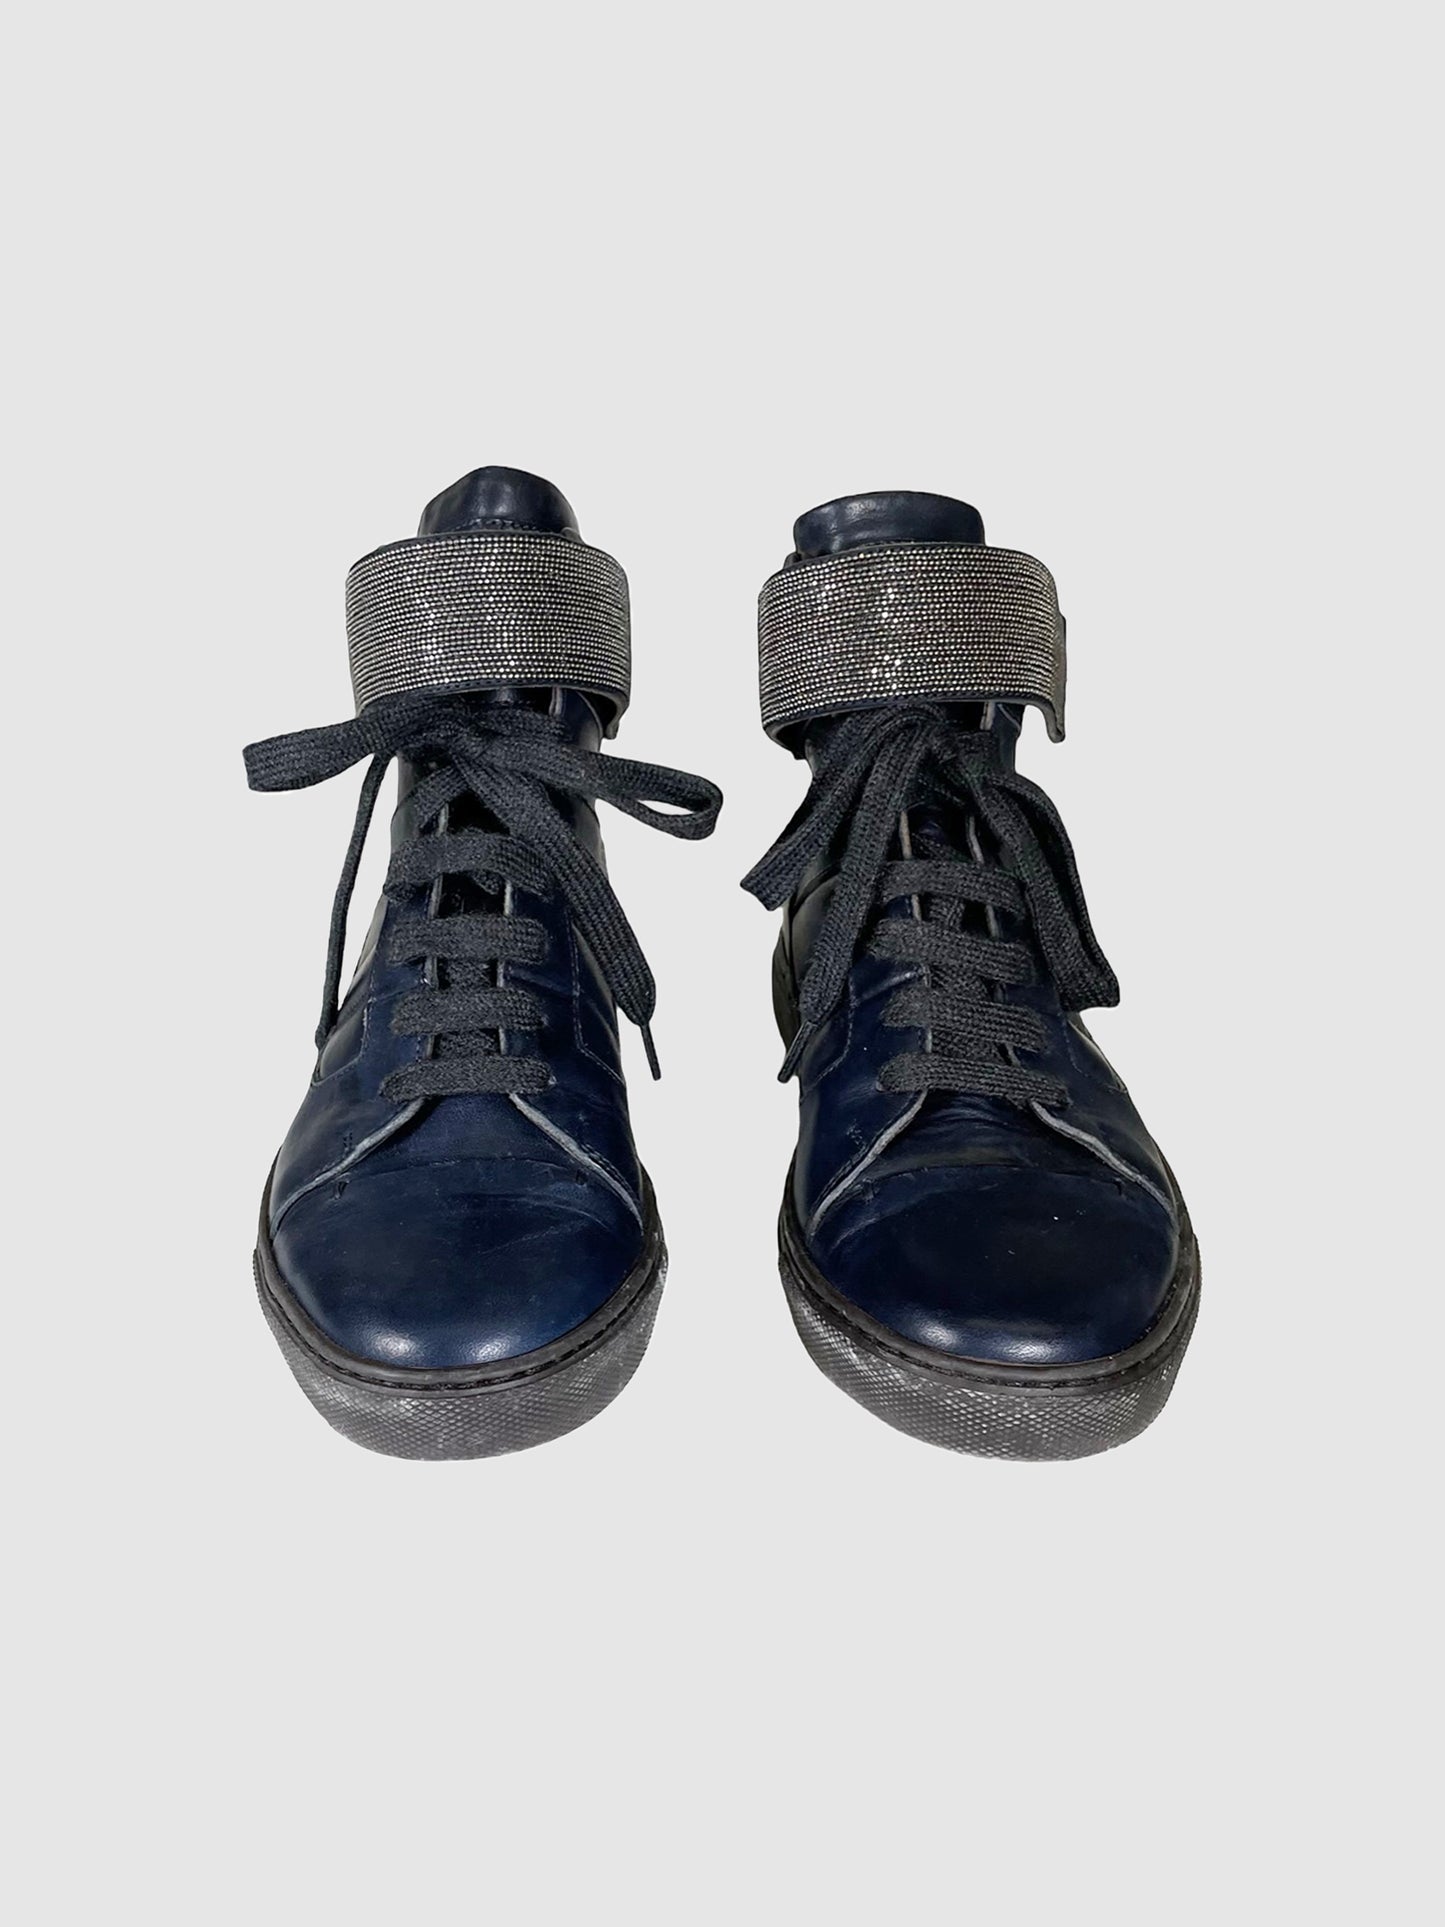 High Top Leather Sneakers - Size 36.5